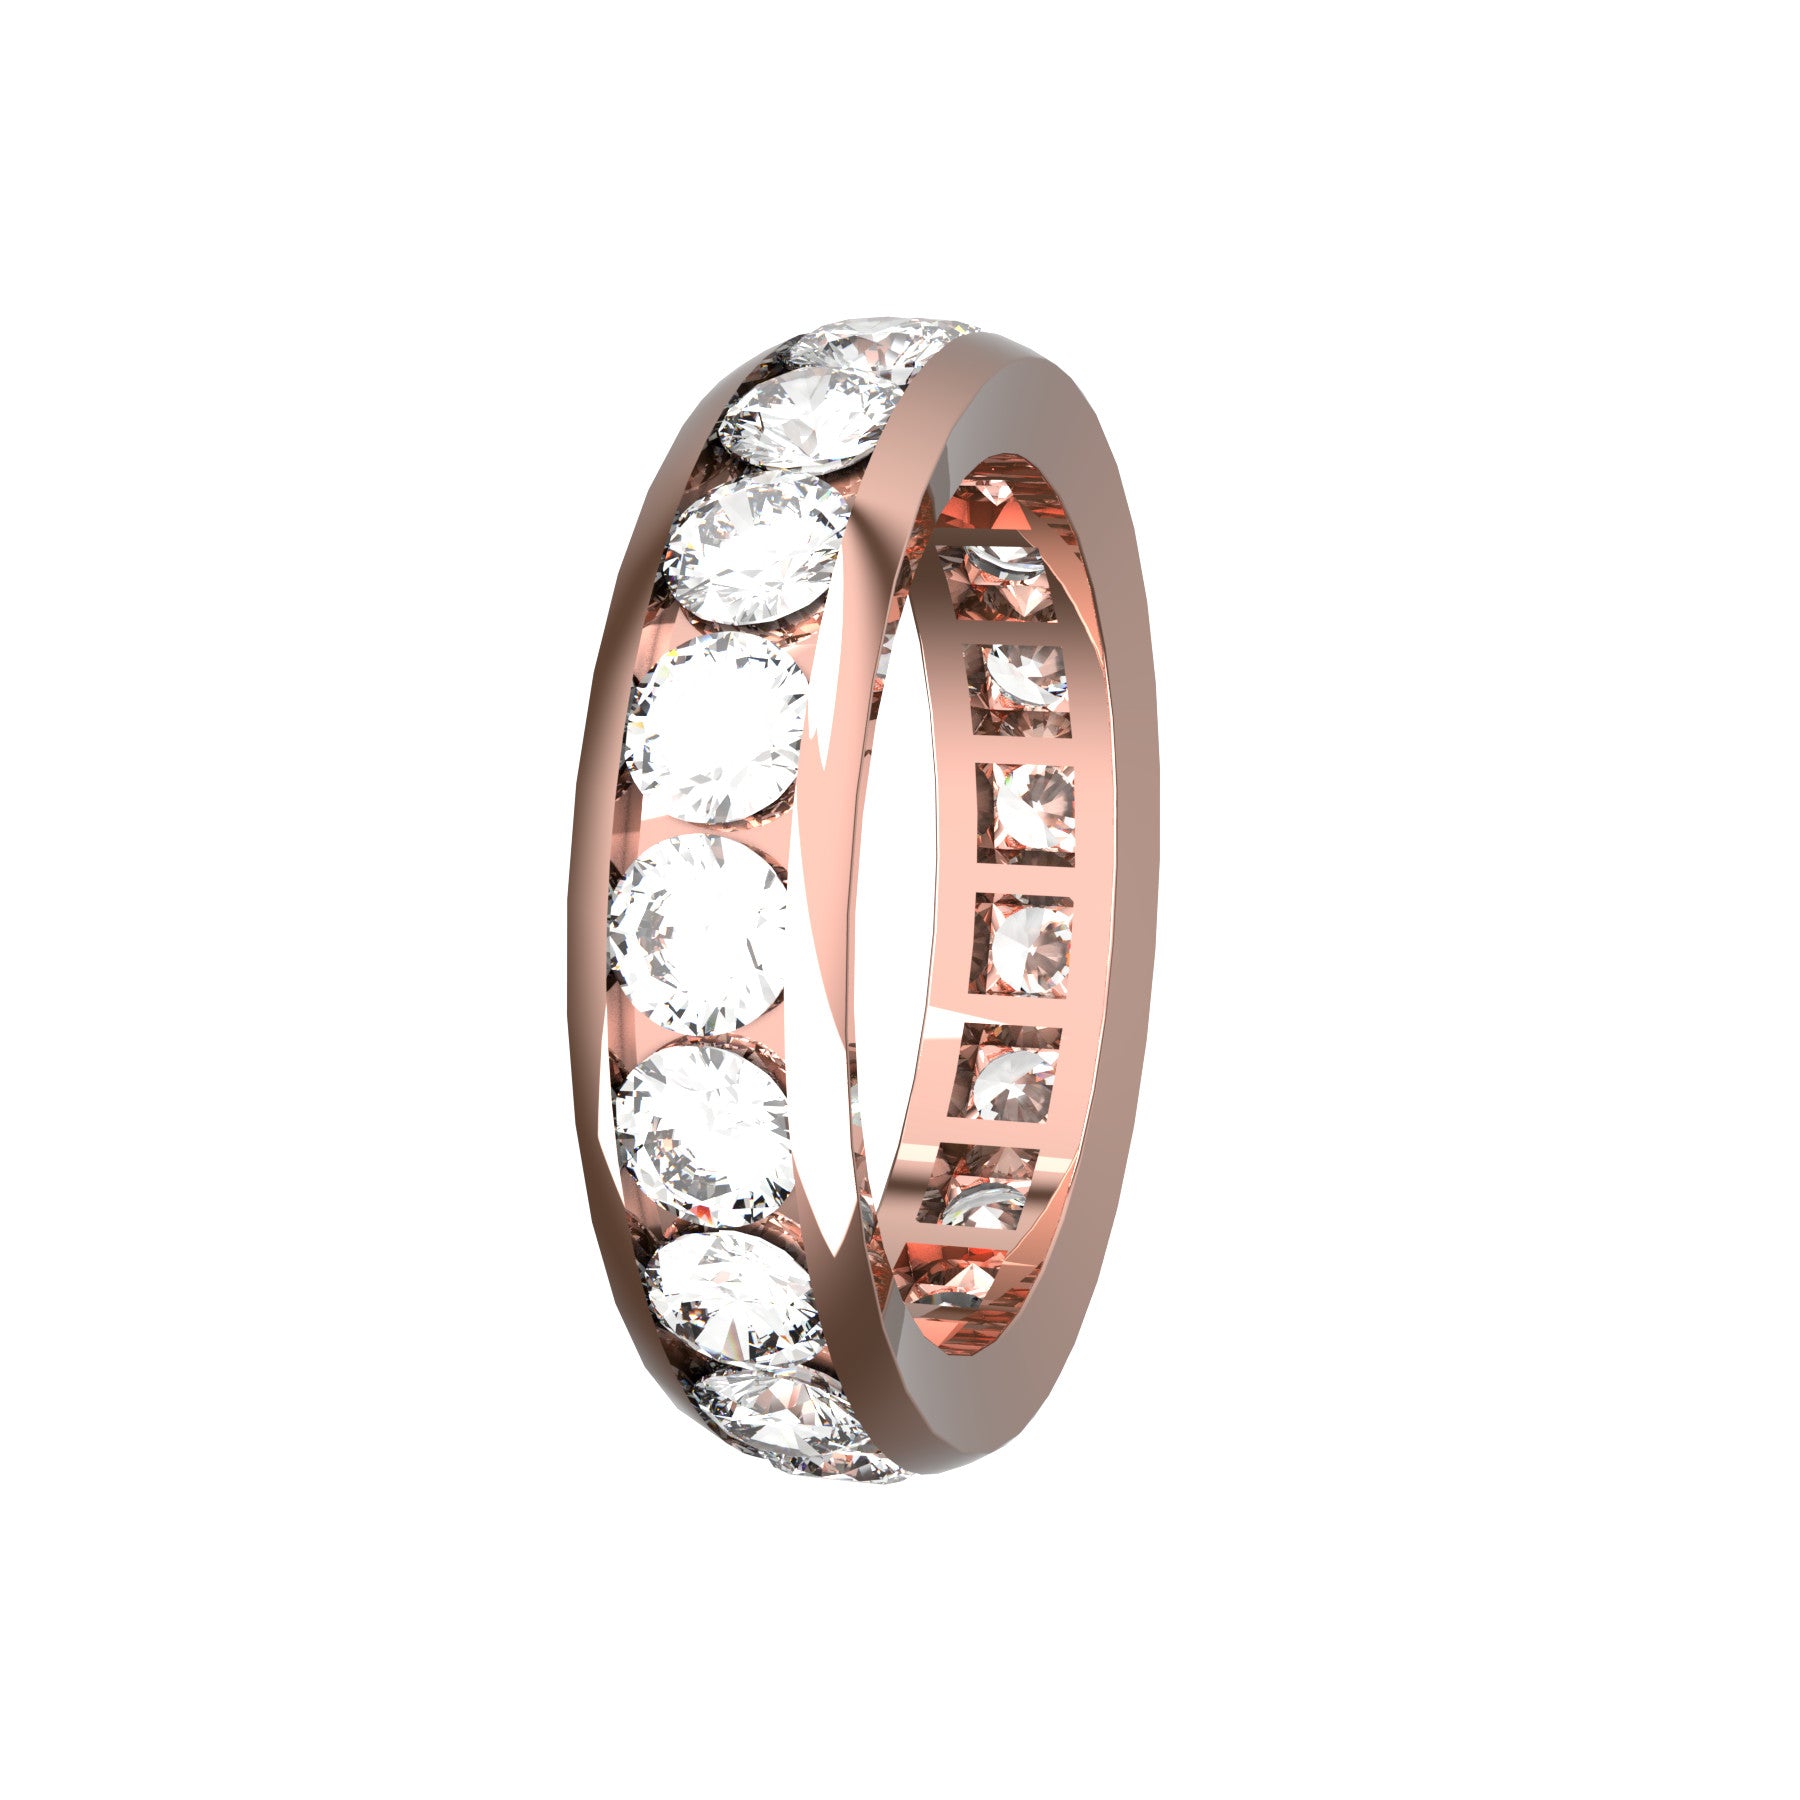  everlasting wedding band, 18 k pink gold, 0,13 ct round natural diamonds, weight about 4,90 g. (0,17 oz), width 5,00 mm